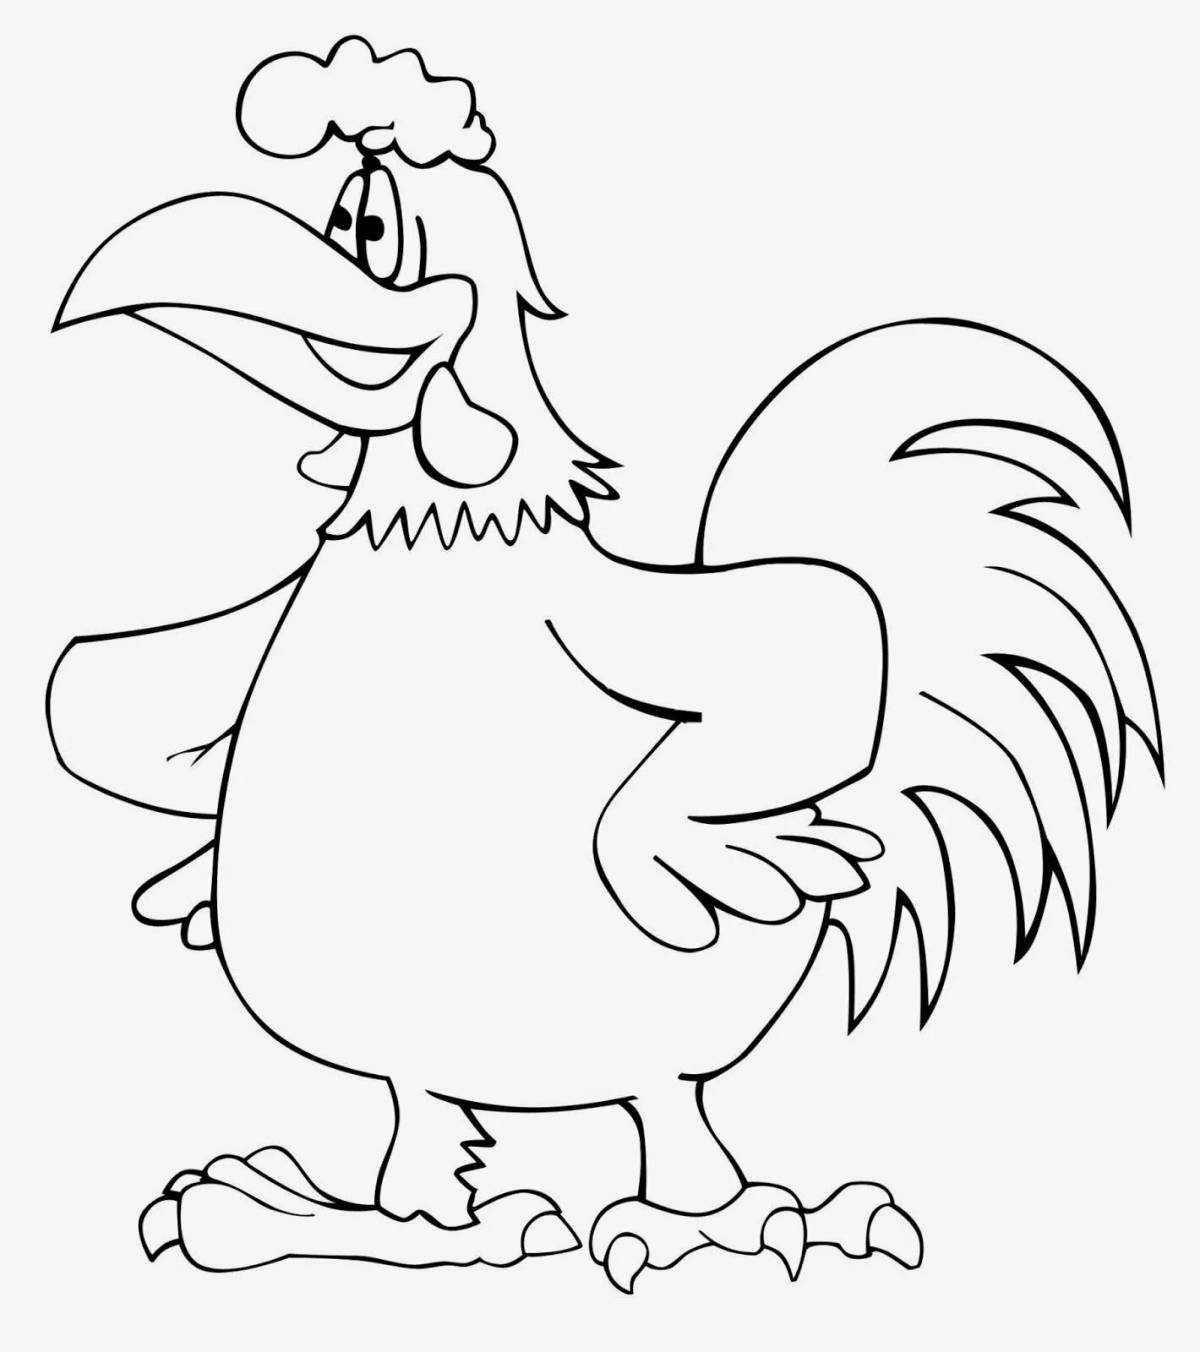 Coloring book sparkling rooster